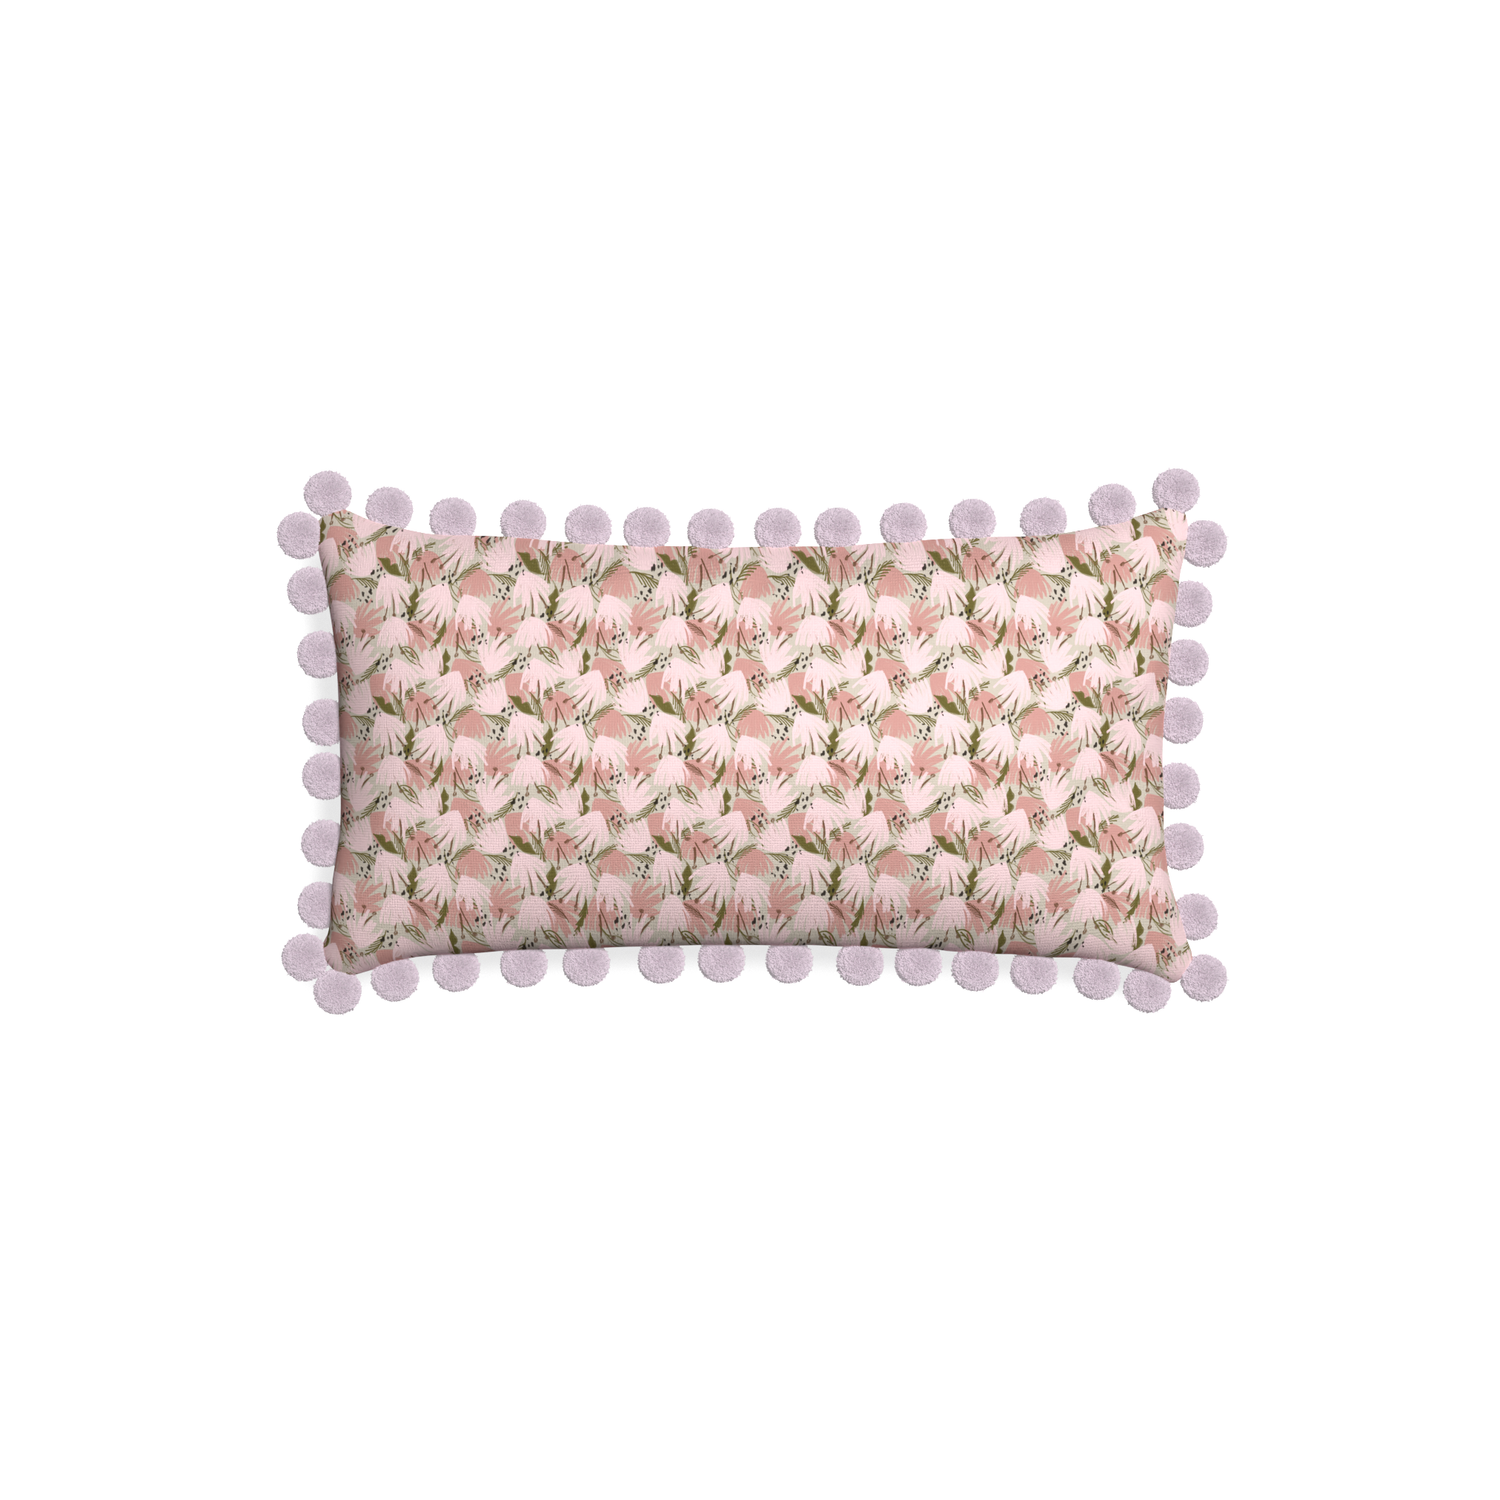 Petite-lumbar eden pink custom pink floralpillow with l on white background